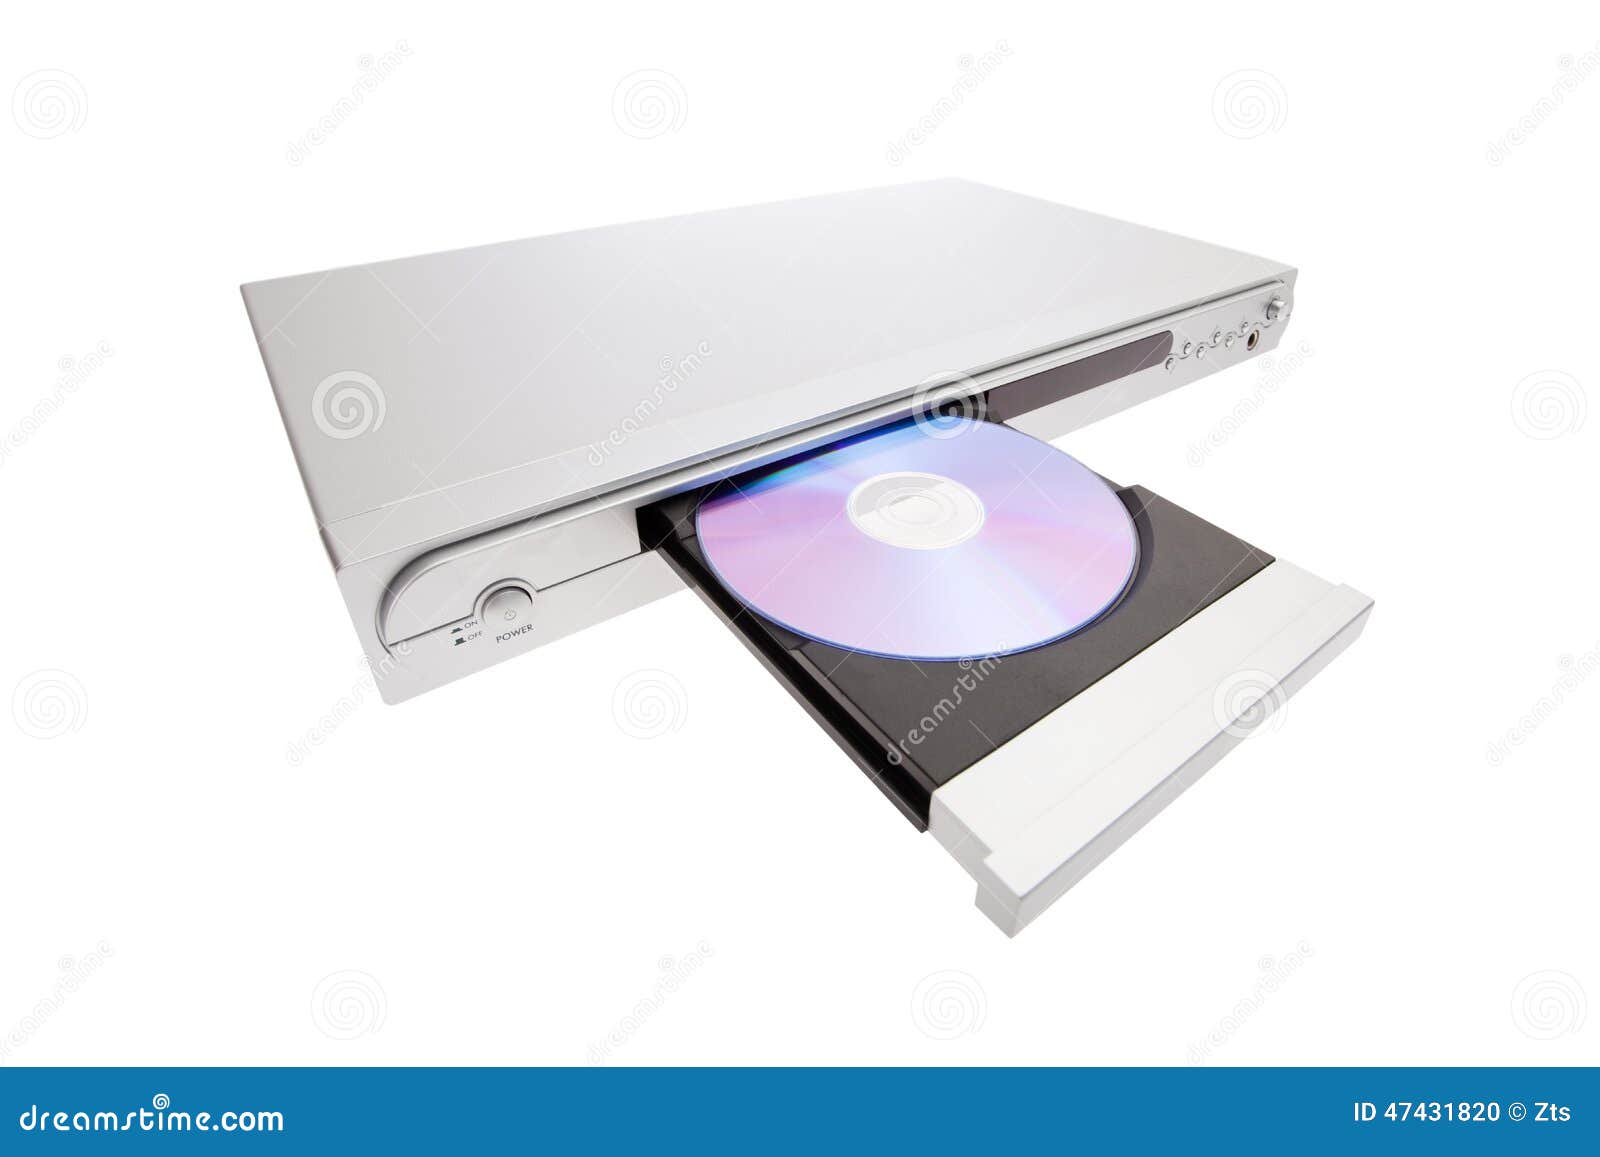 dvd player ejecting disc